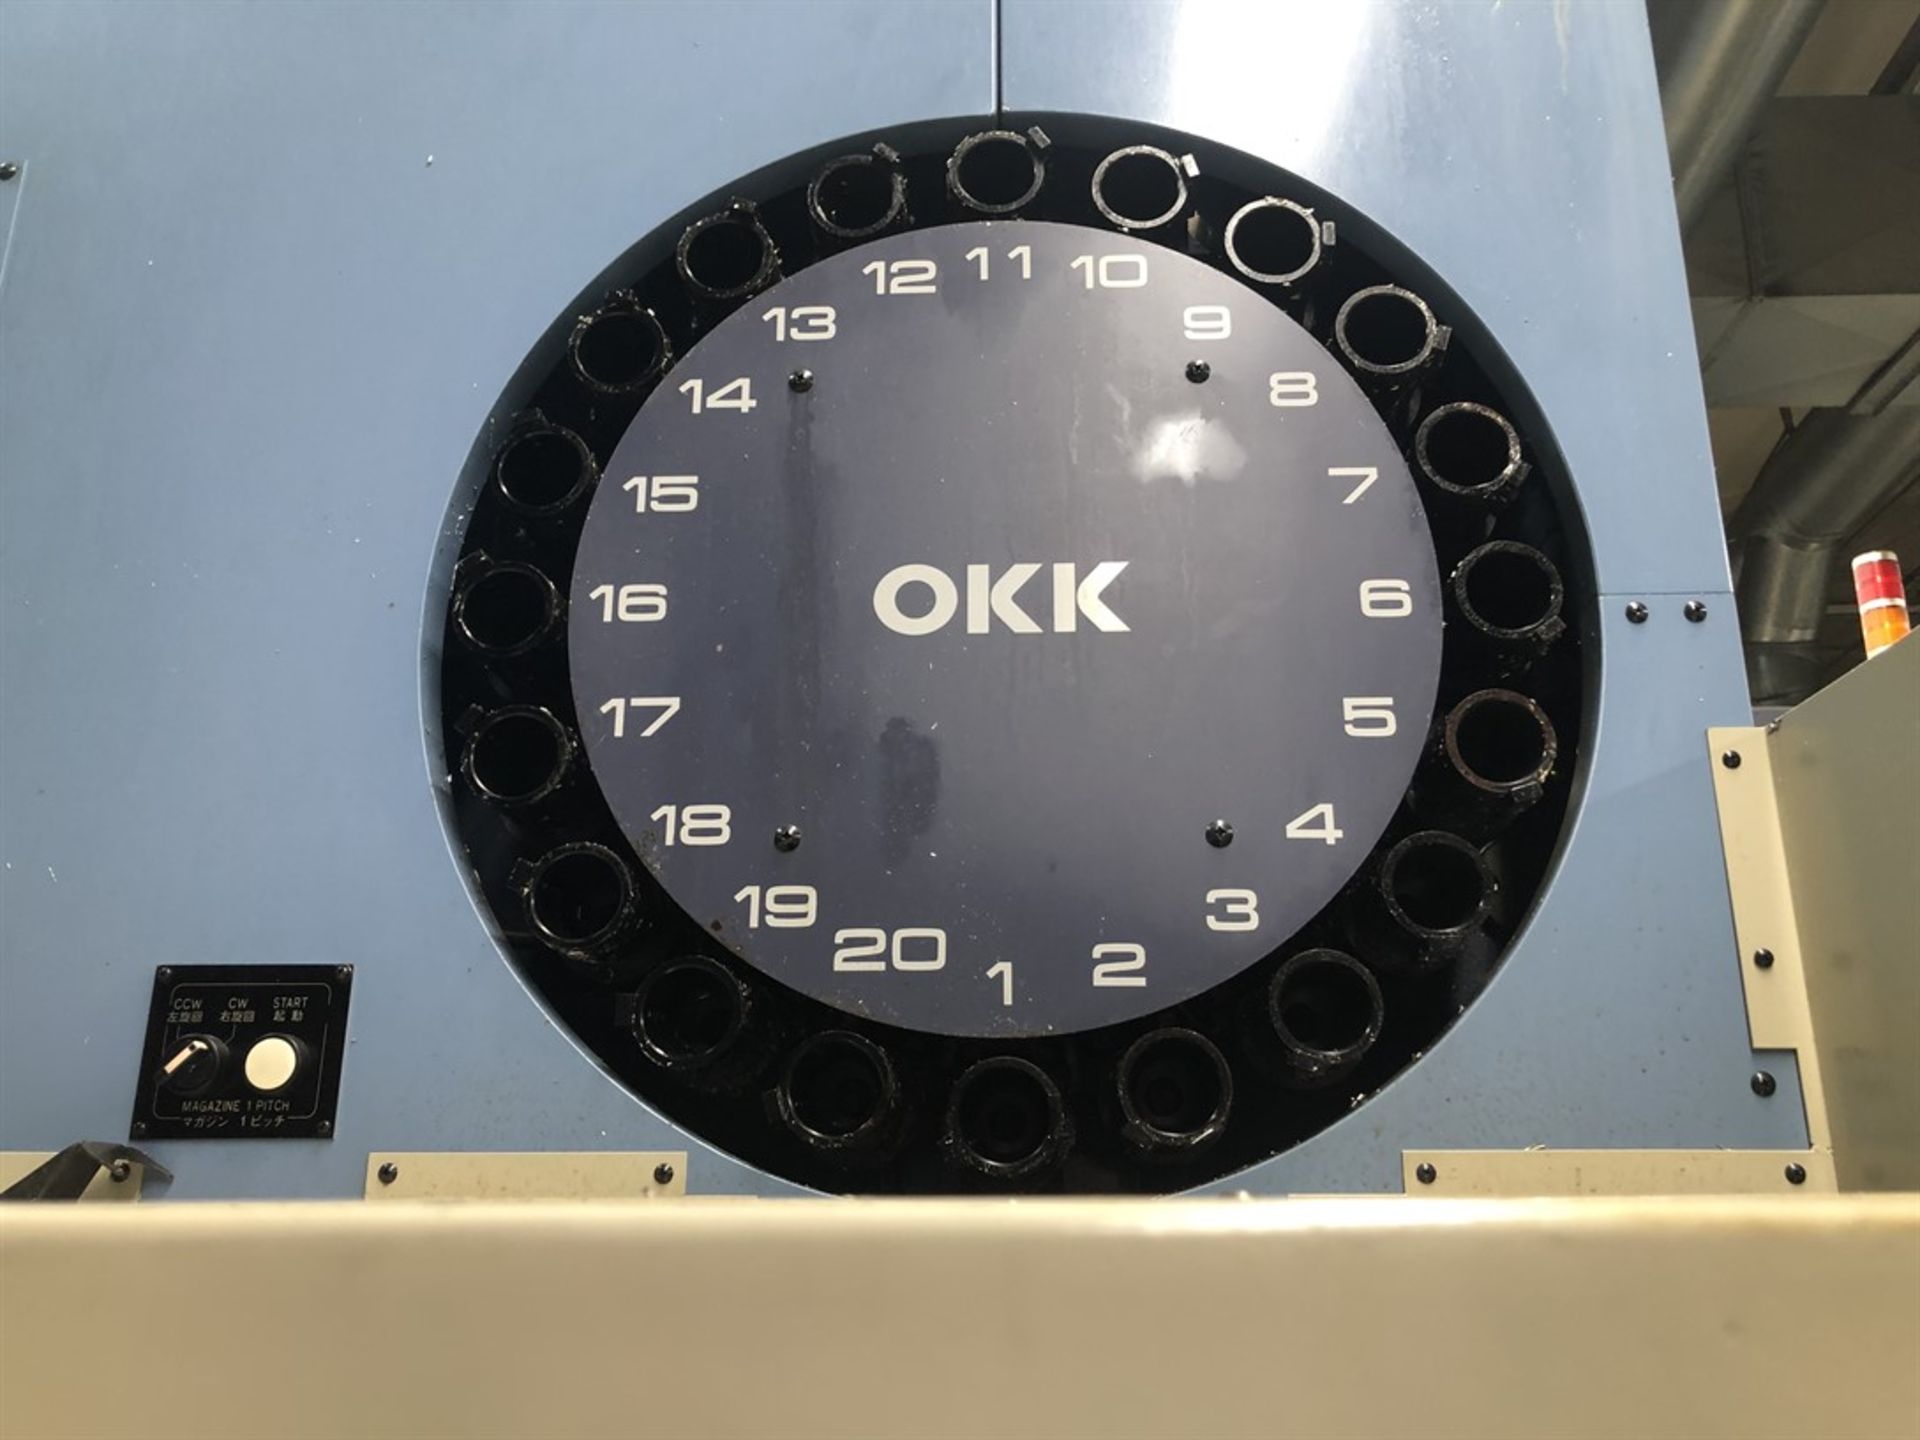 OKK VM5II Vertical Machining Center, s/n, 434, Neomatic 635 Control, 22” x 41” Table, CT40 Spindle - Image 5 of 11